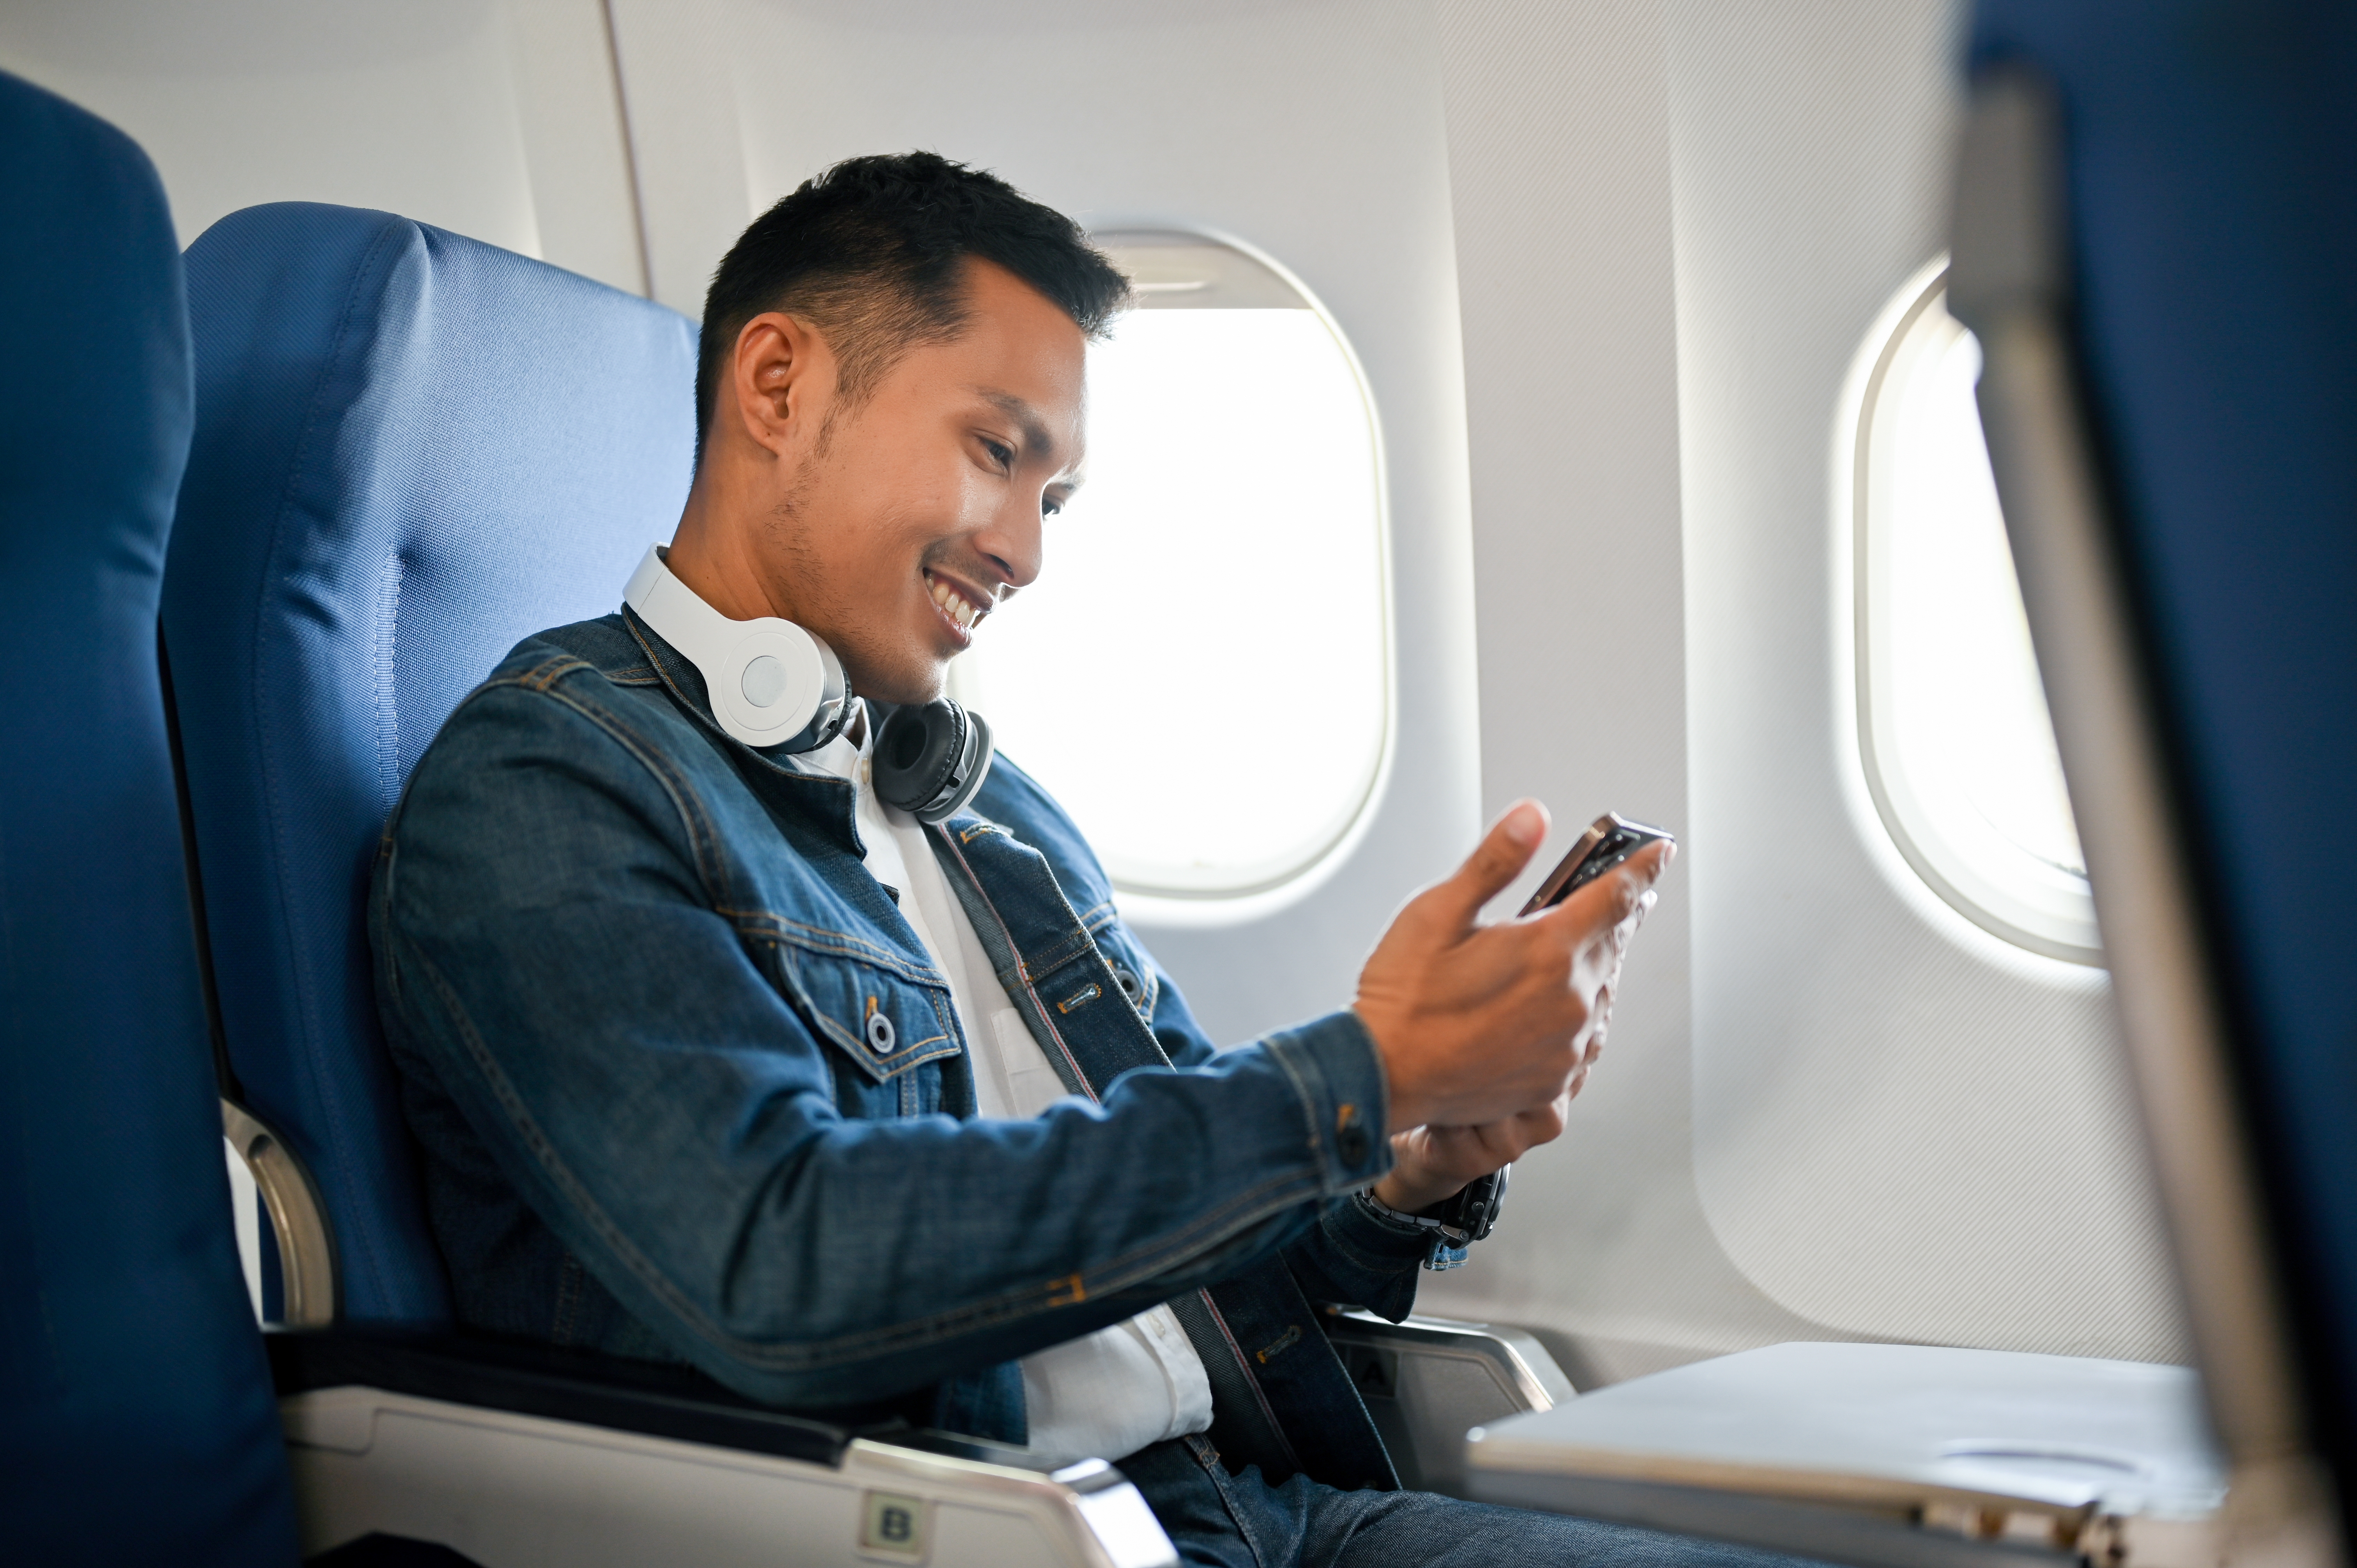 Young man on a plane | Source: Shutterstock